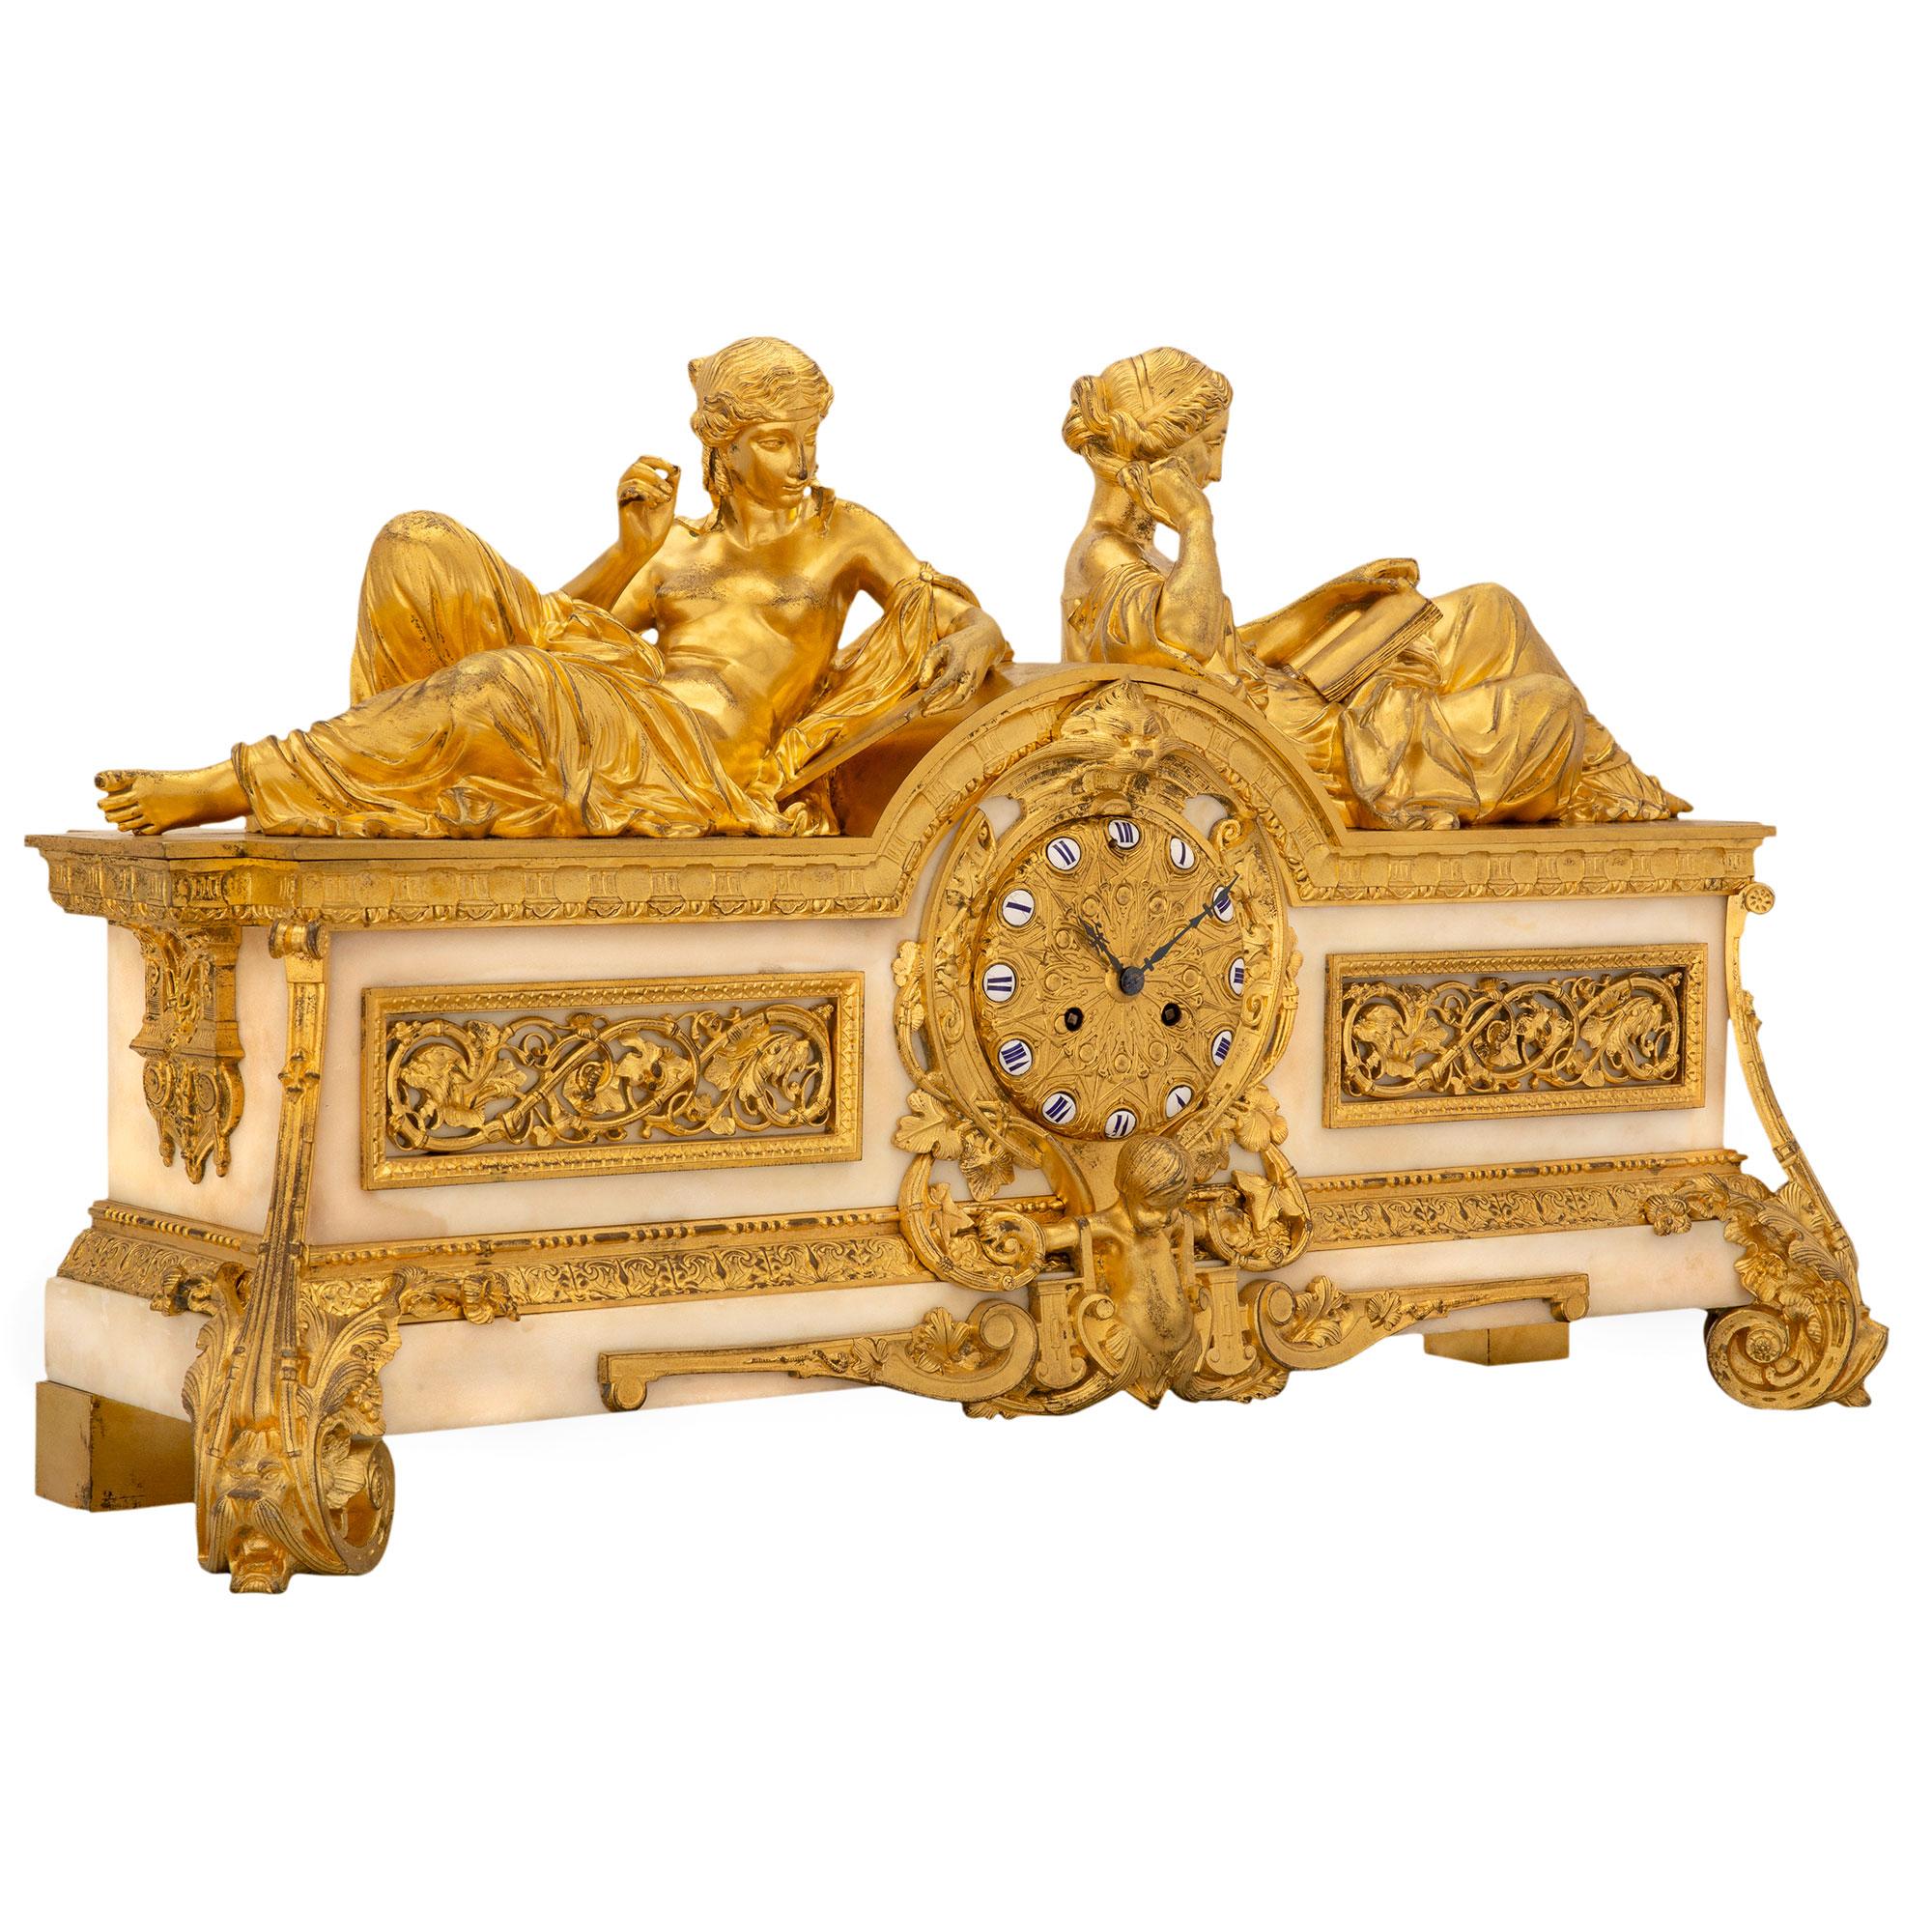 An impressive French early 19th century ormolu and white Carrara marble clock. The clock is raised by elegant scrolled foliate supports with dolphin heads. The rectangular white Carrara marble base is decorated with a striking array of richly chased